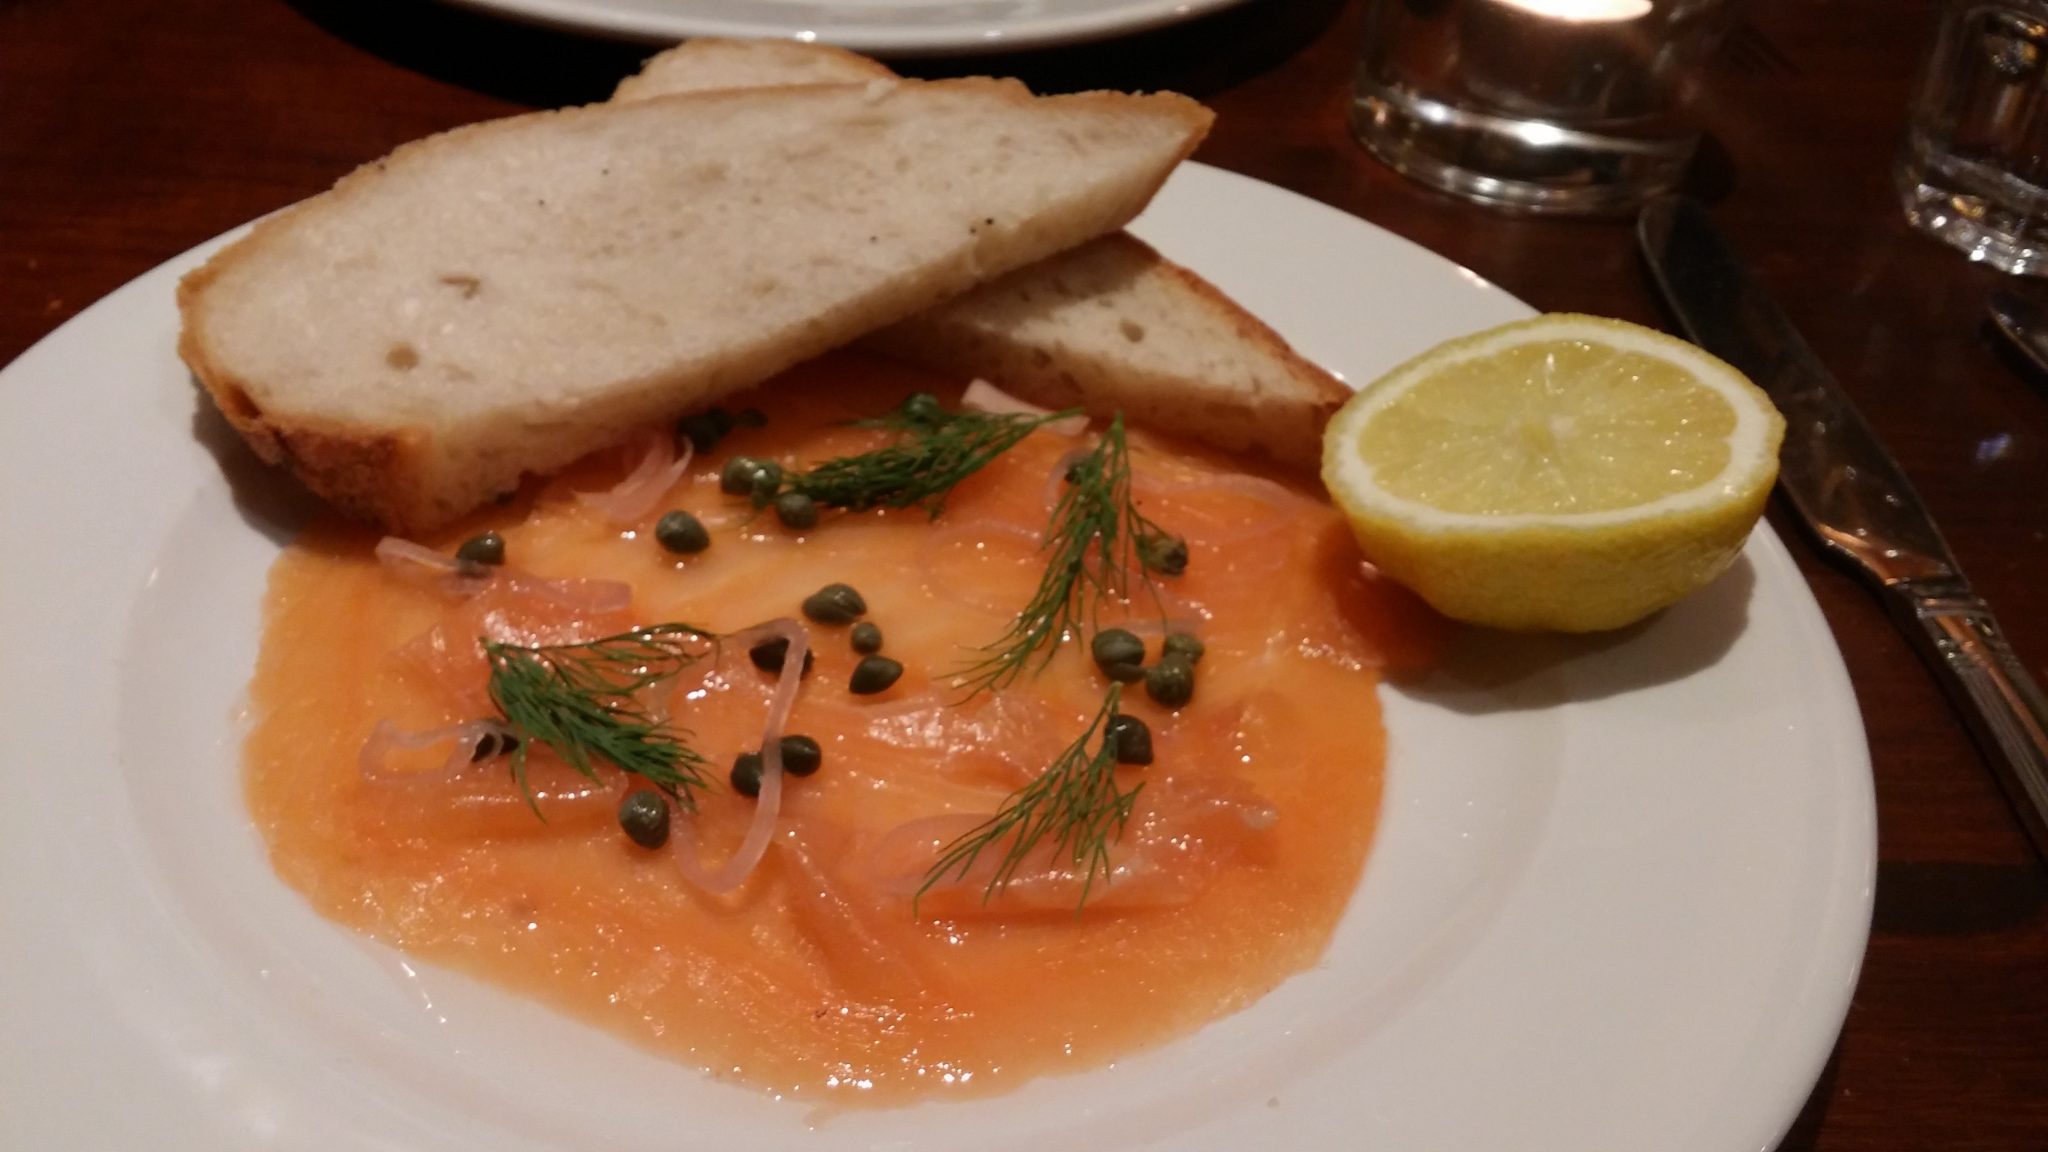 H. Foreman & Sons Scottish Smoked Salmon (with shallots, Lilliput capers, lemon), slice of sourdough.